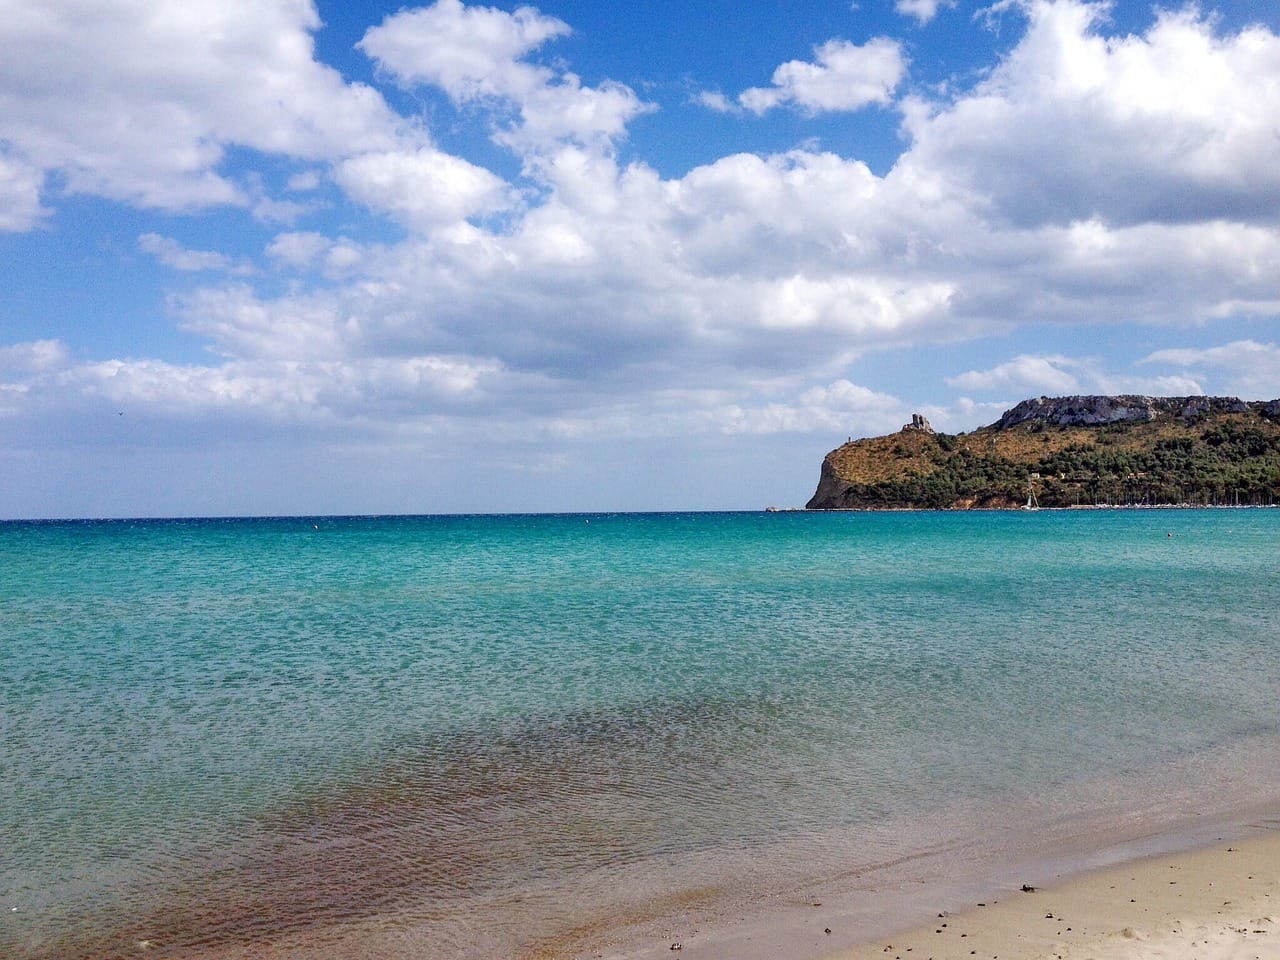 Poetto in Things to see in Cagliari Italy